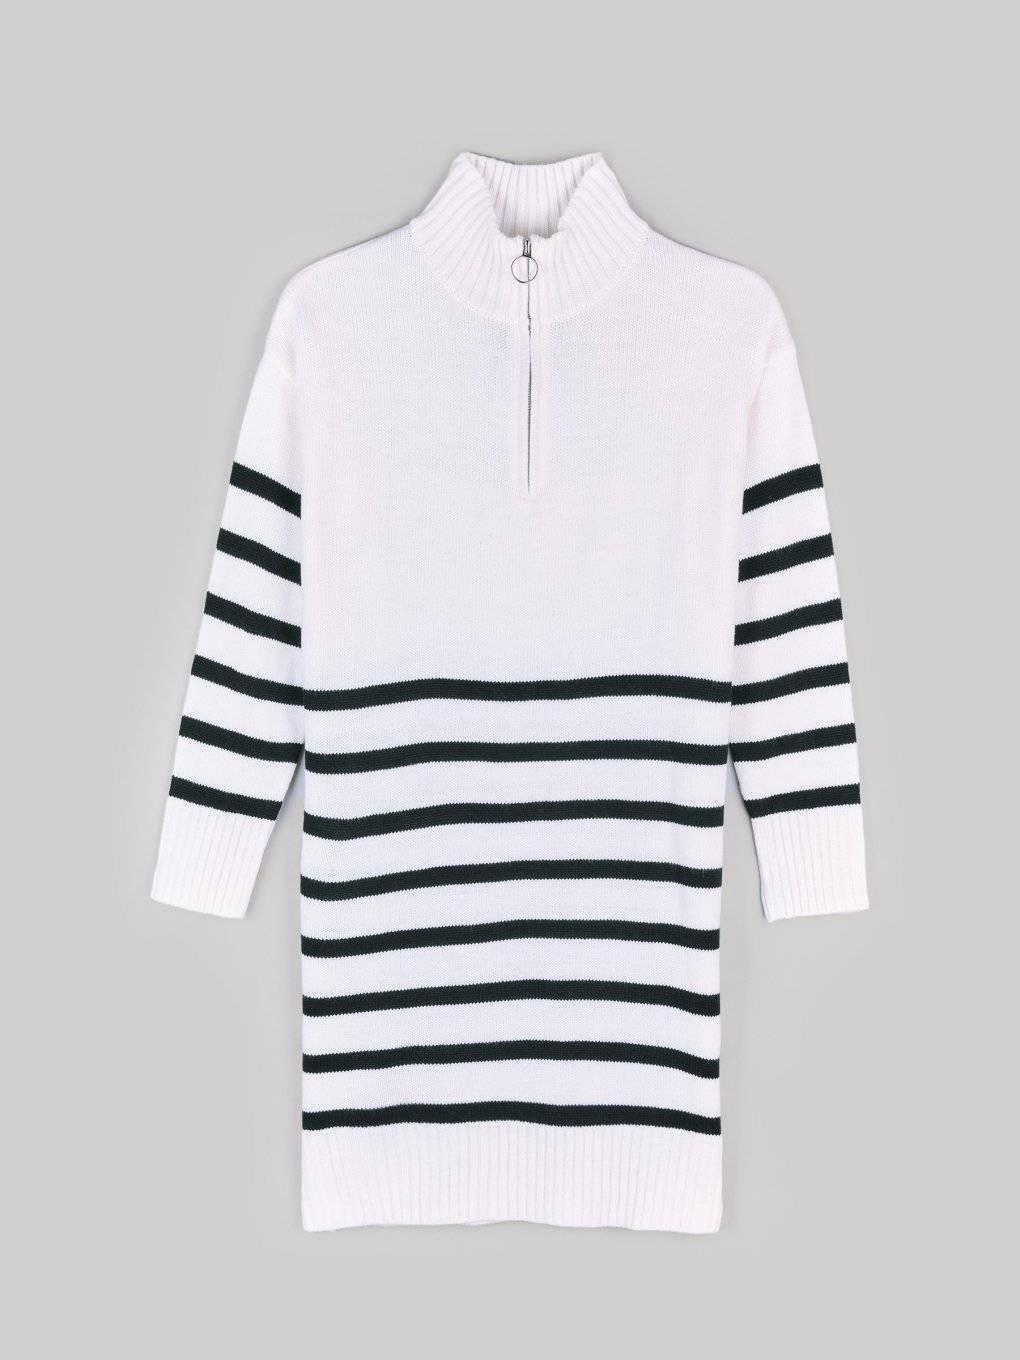 Striped knitted dress with zipper